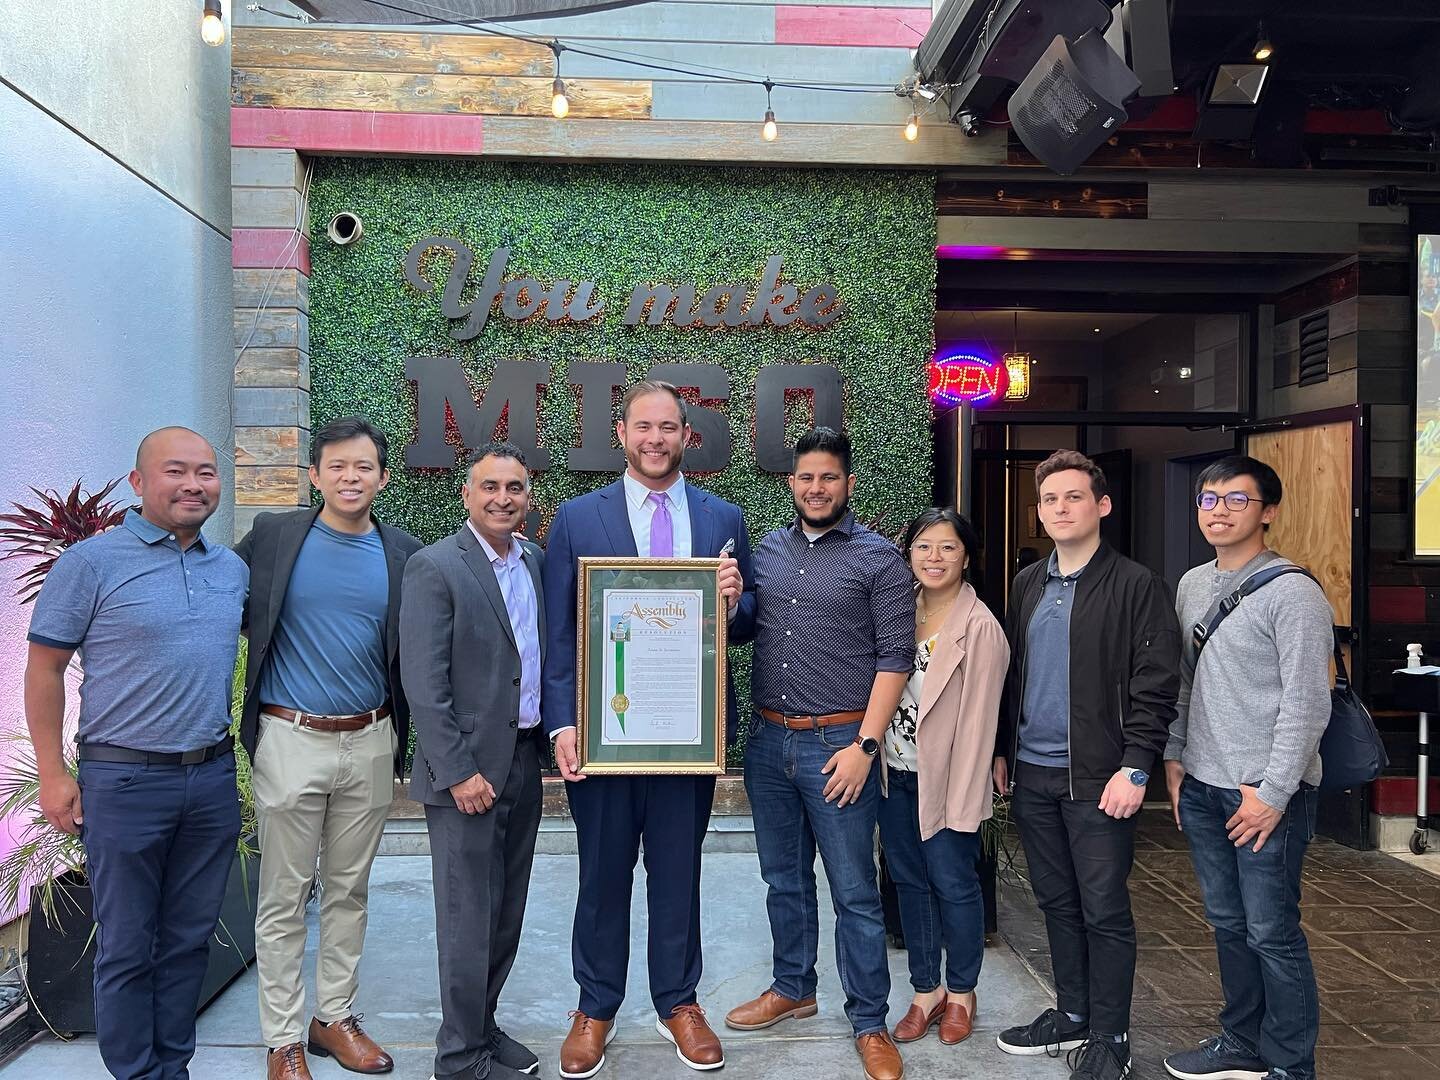 Thankful and grateful to be supported by this crew tonight. Thank you @ash_kalra for this California Legislature State Assembly member resolution and for the Leadership in Advocacy Award. I&rsquo;m honored to have been considered with all the award r